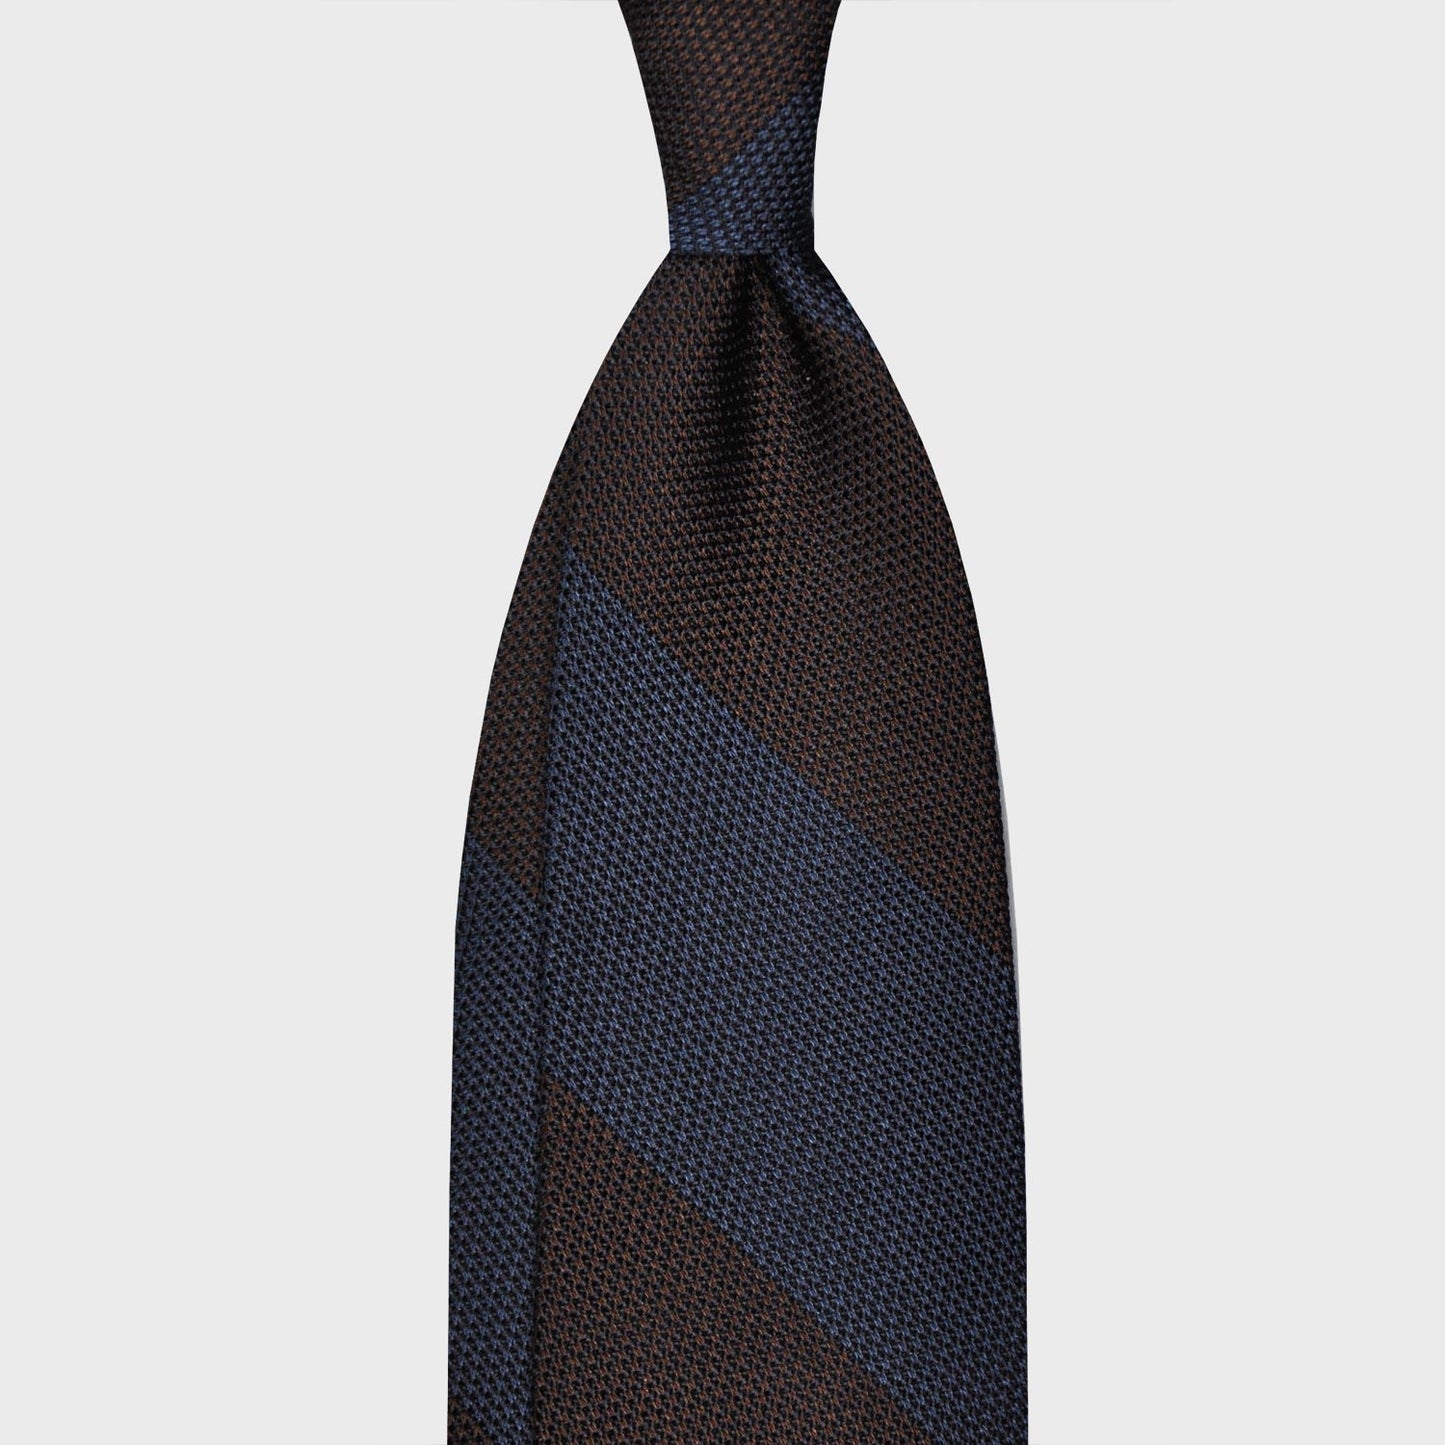 Brown Regimental Grenadine Silk Tie Wide Striped. Wide striped silk tie, made with refined grenadine silk, hand made tie F.Marino Napoli exclusive for Wools Boutique Uomo, hand rolled edge, 3 folds unlined, striped coffee brown and navy blue